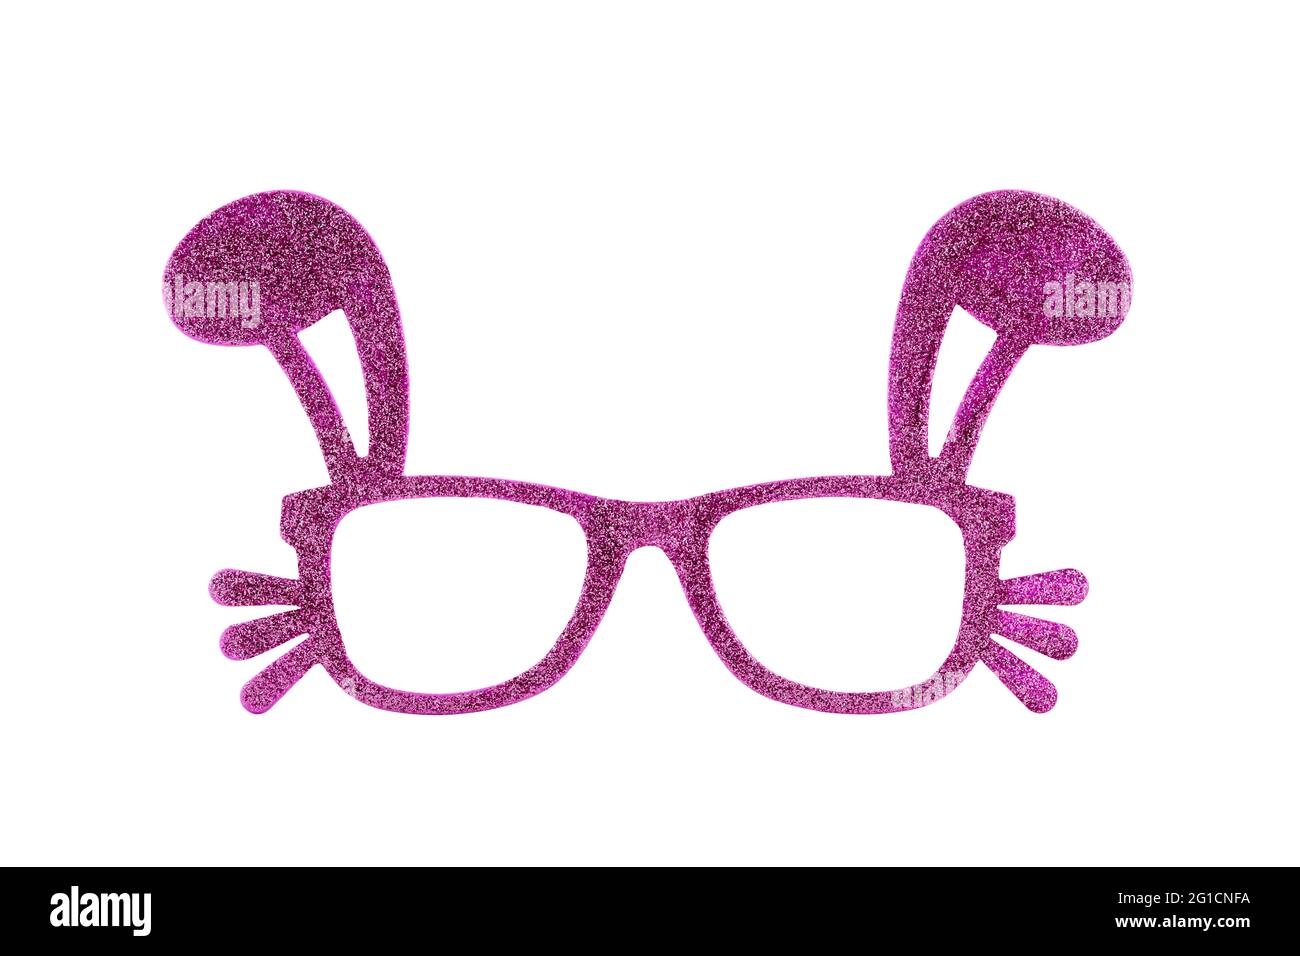 Funny pink glittering decorative glasses with hare ears isolated on white with clipping path Stock Photo